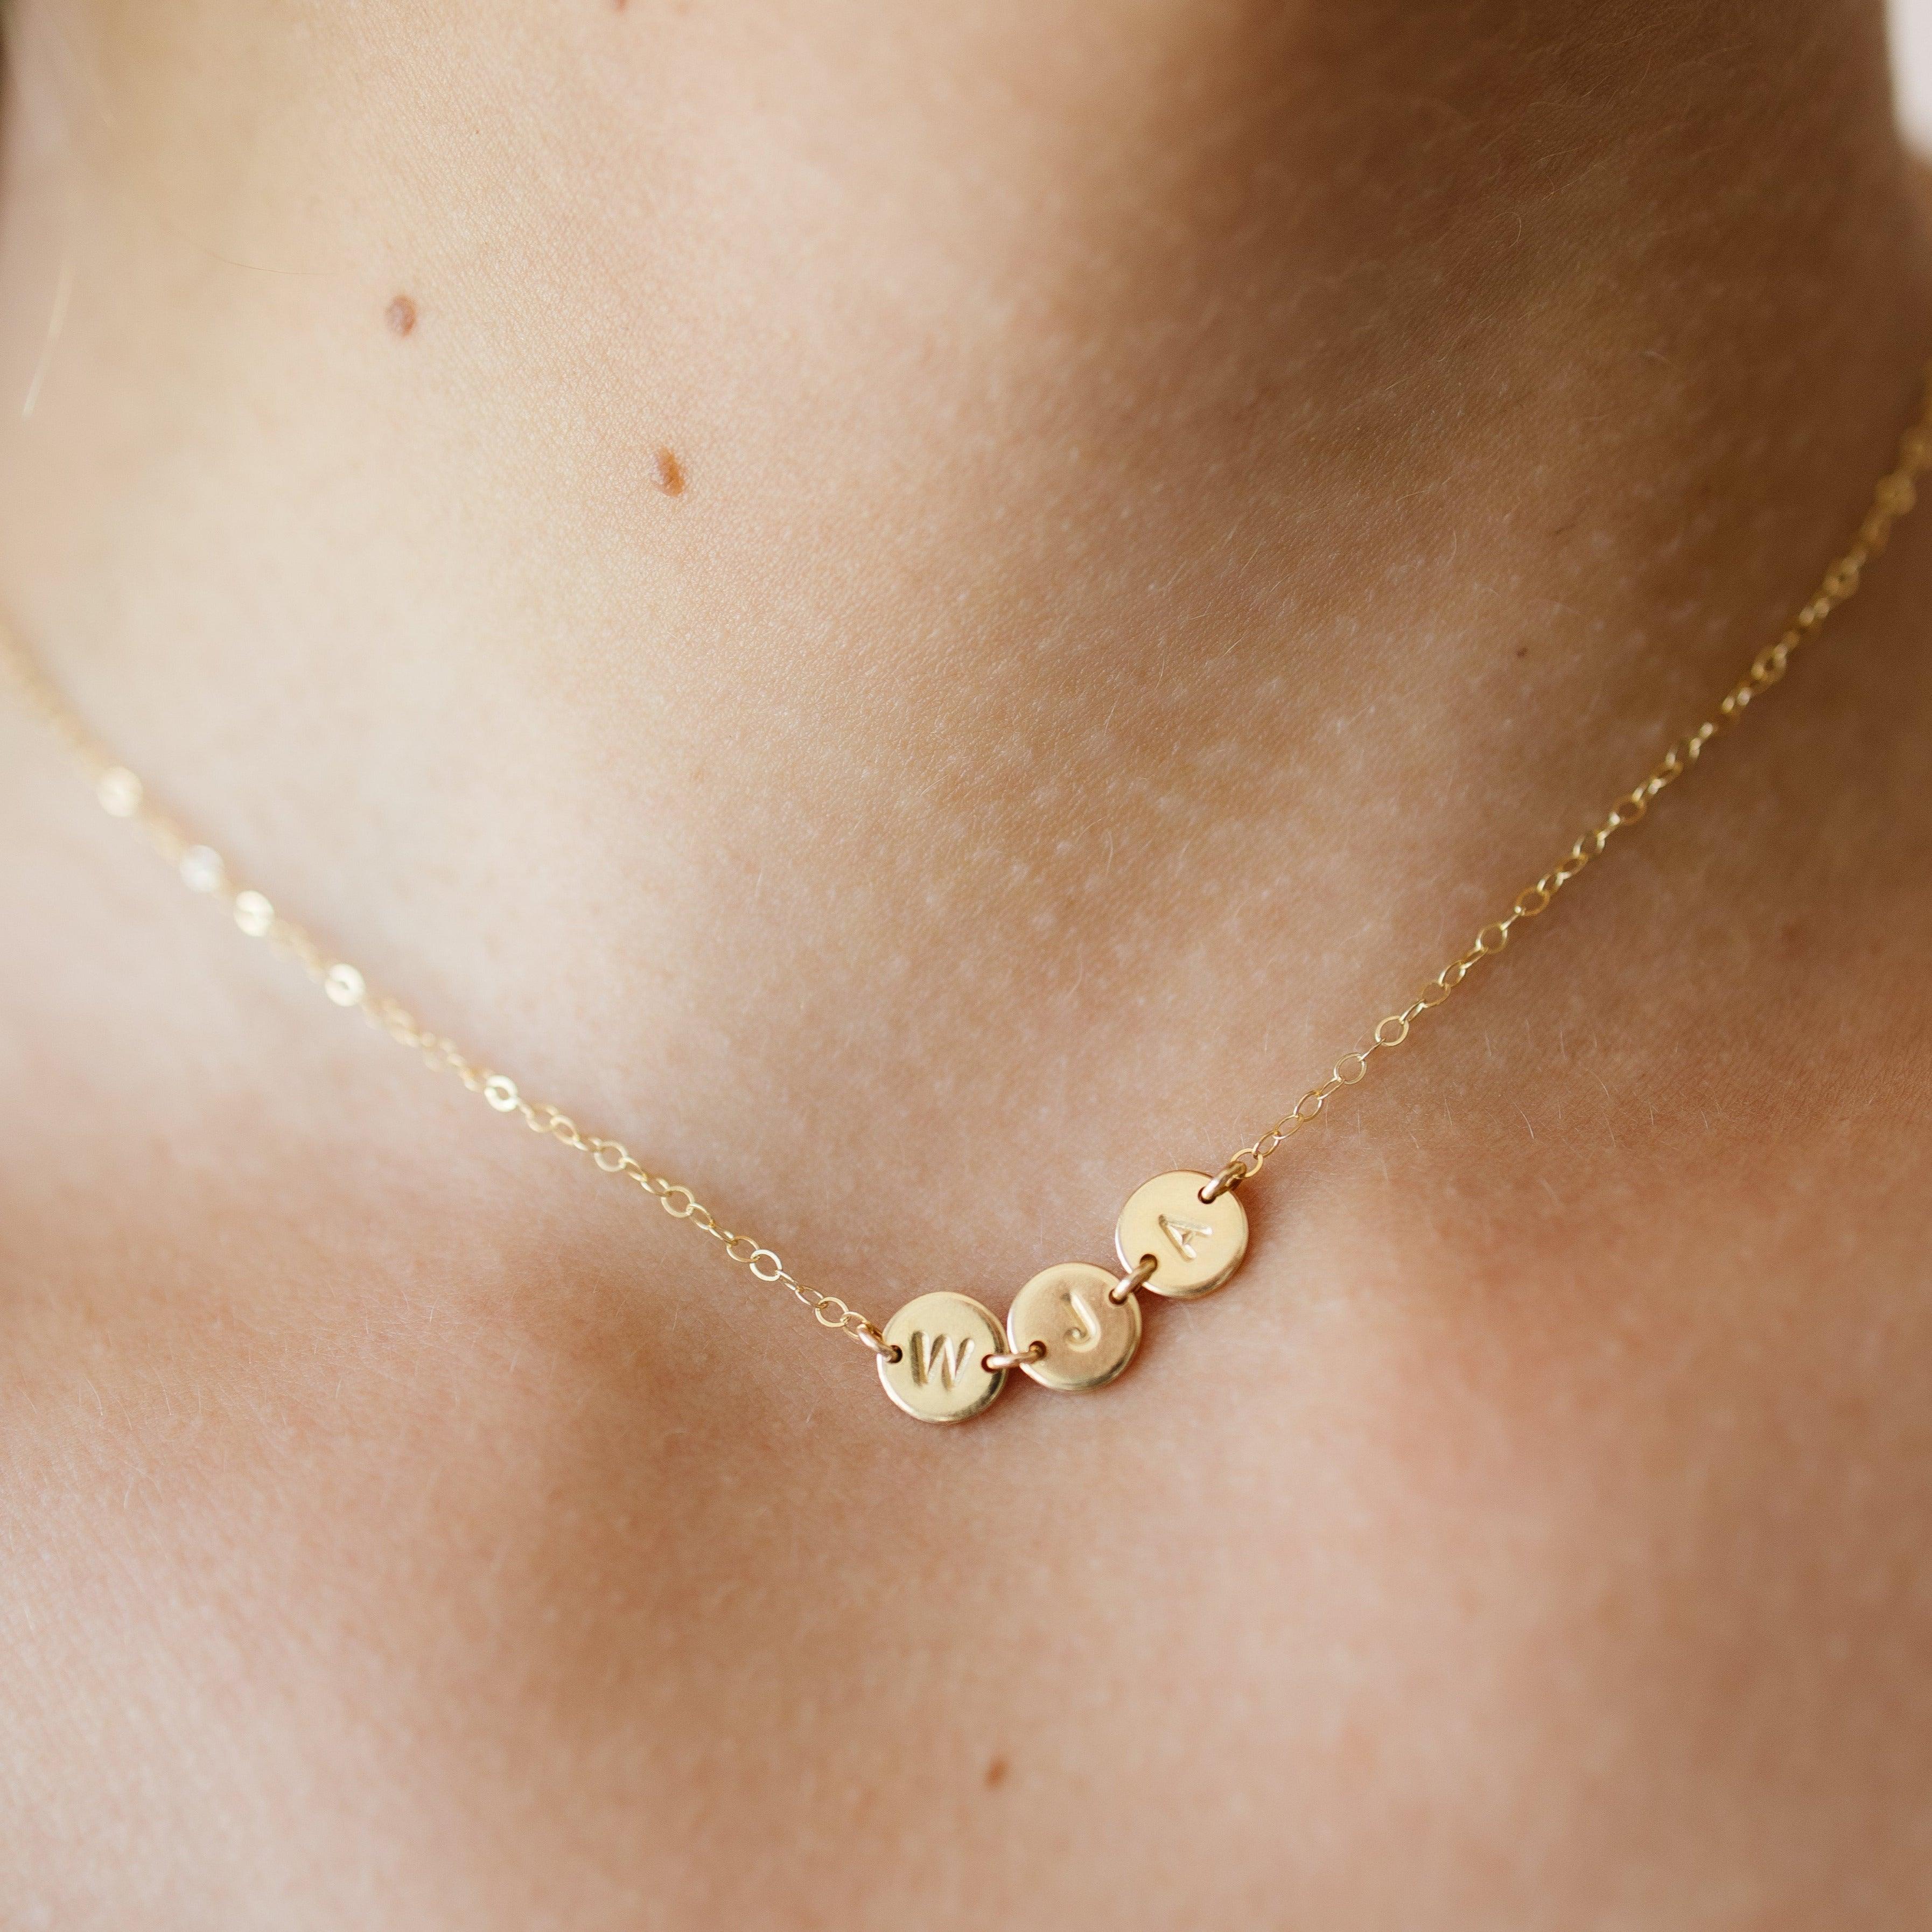 Hazel Linked Initial Necklace - Nolia Jewelry - Meaningful + Sustainably Handcrafted Jewelry